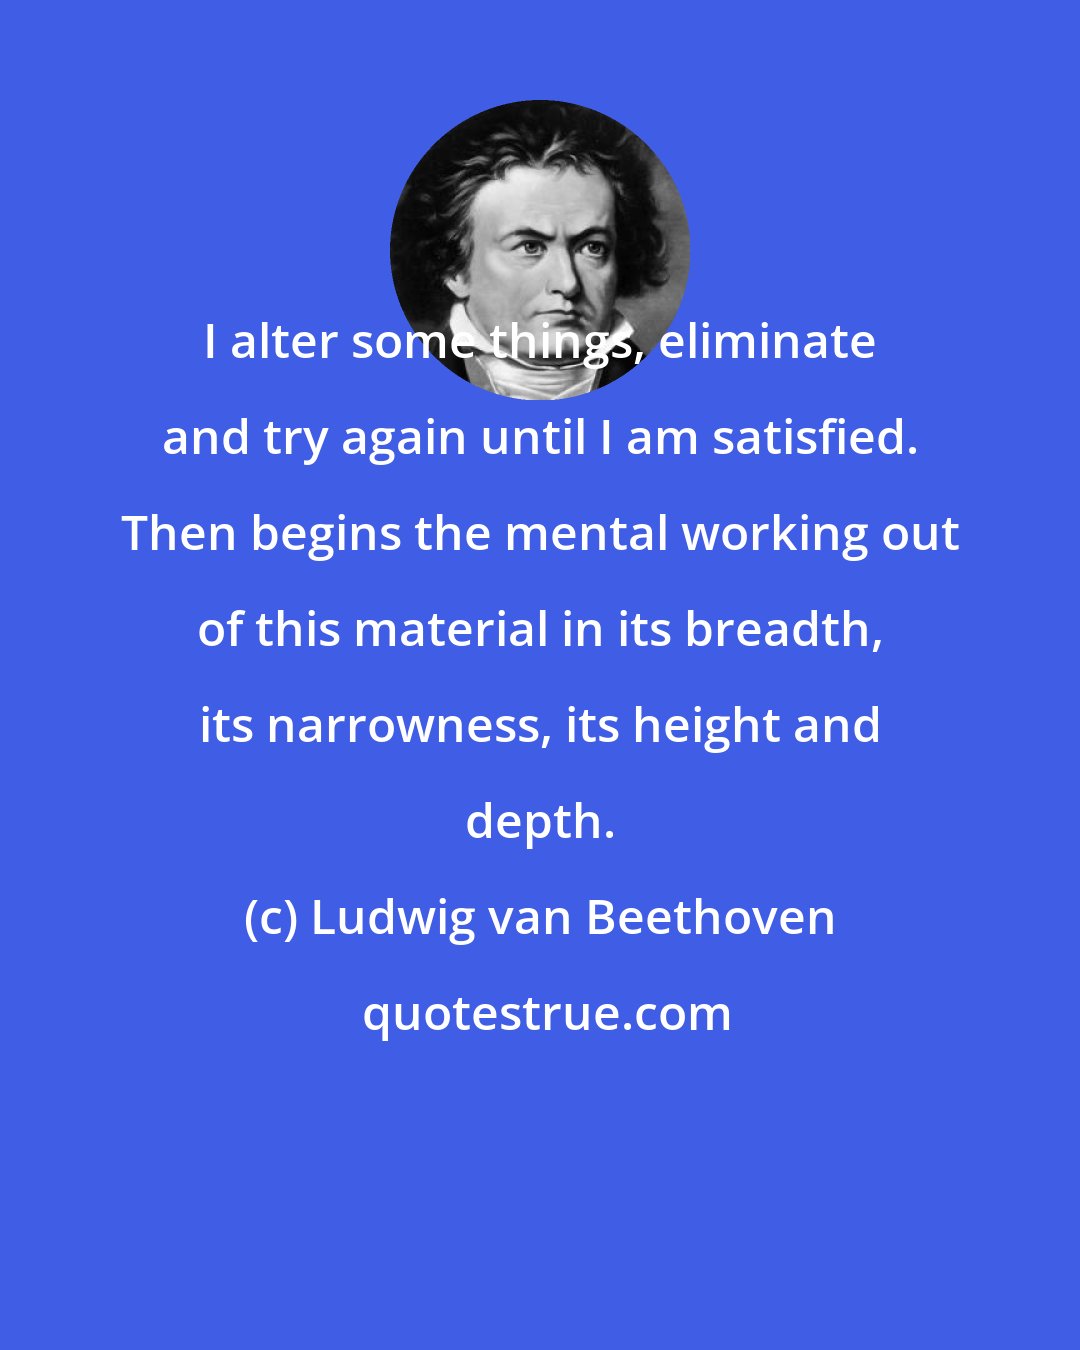 Ludwig van Beethoven: I alter some things, eliminate and try again until I am satisfied. Then begins the mental working out of this material in its breadth, its narrowness, its height and depth.